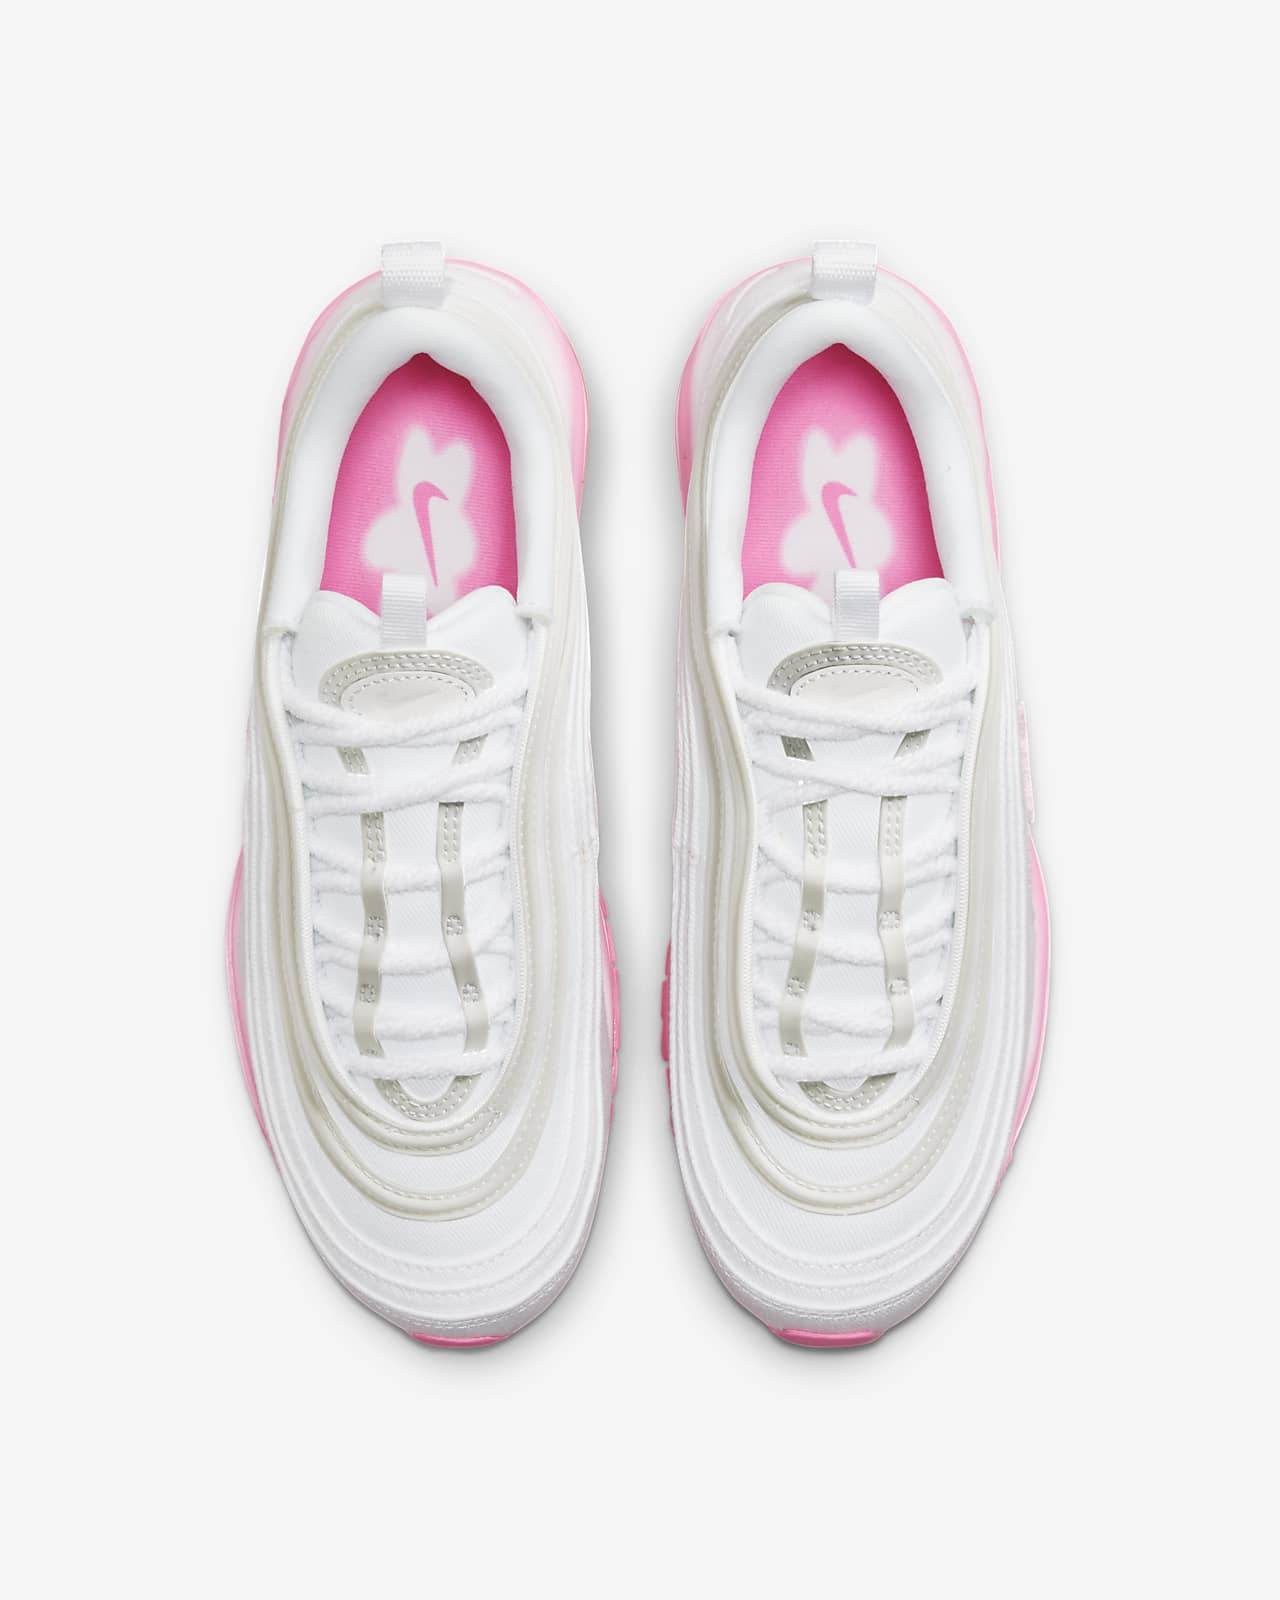 Nike Air Max 97 SE Womens Shoes Review